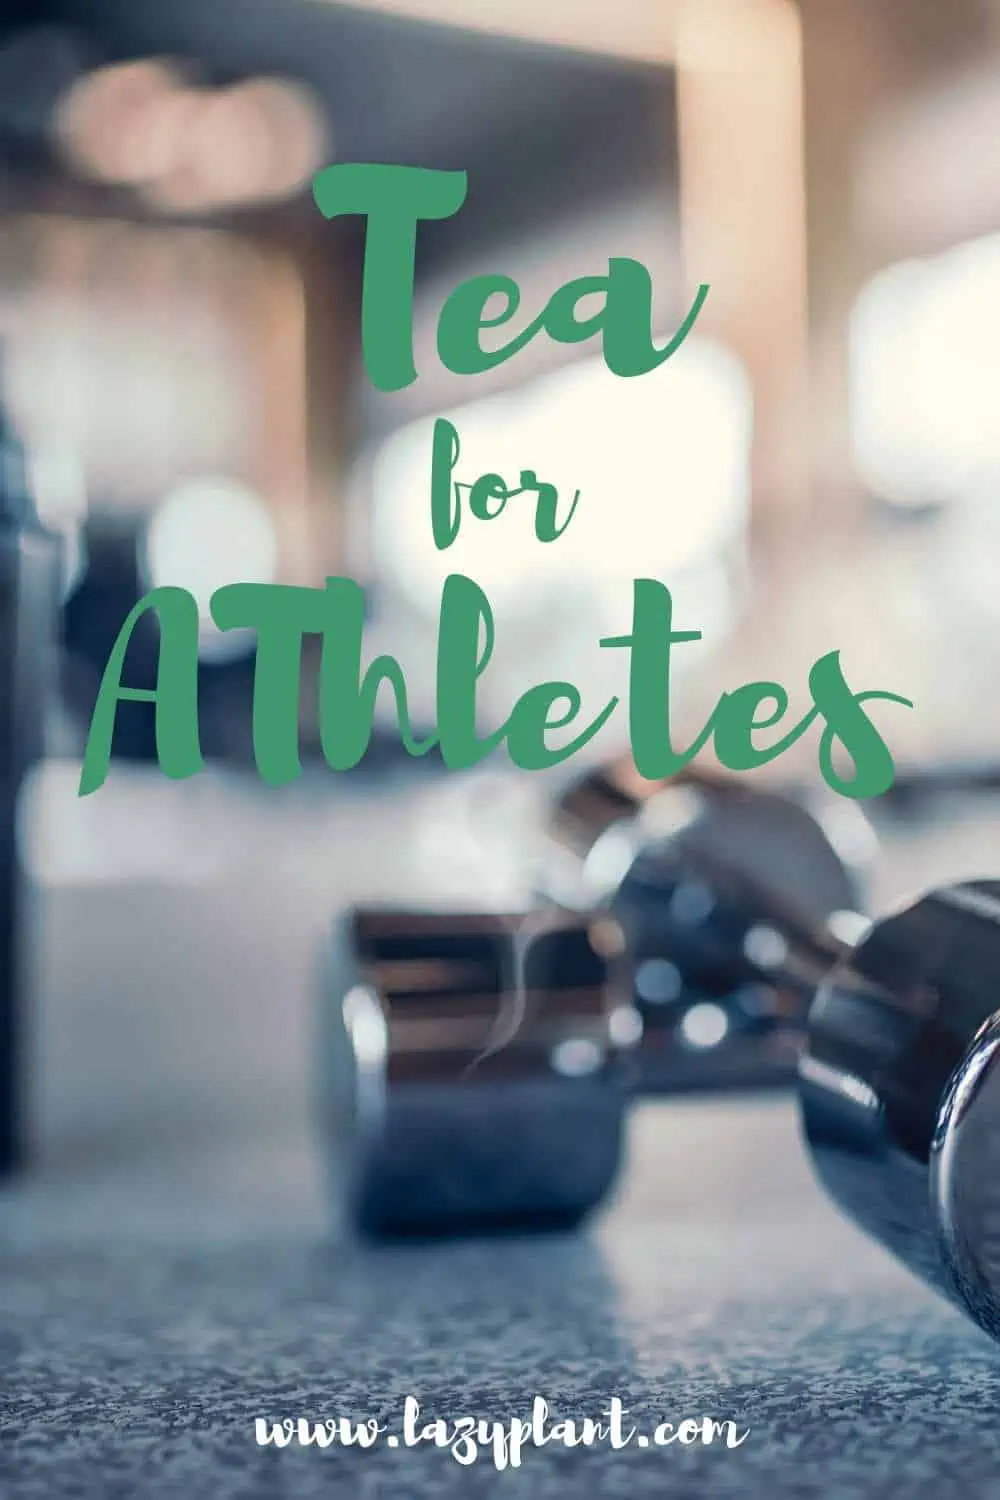 Why should athletes drink tea before & after exercise?